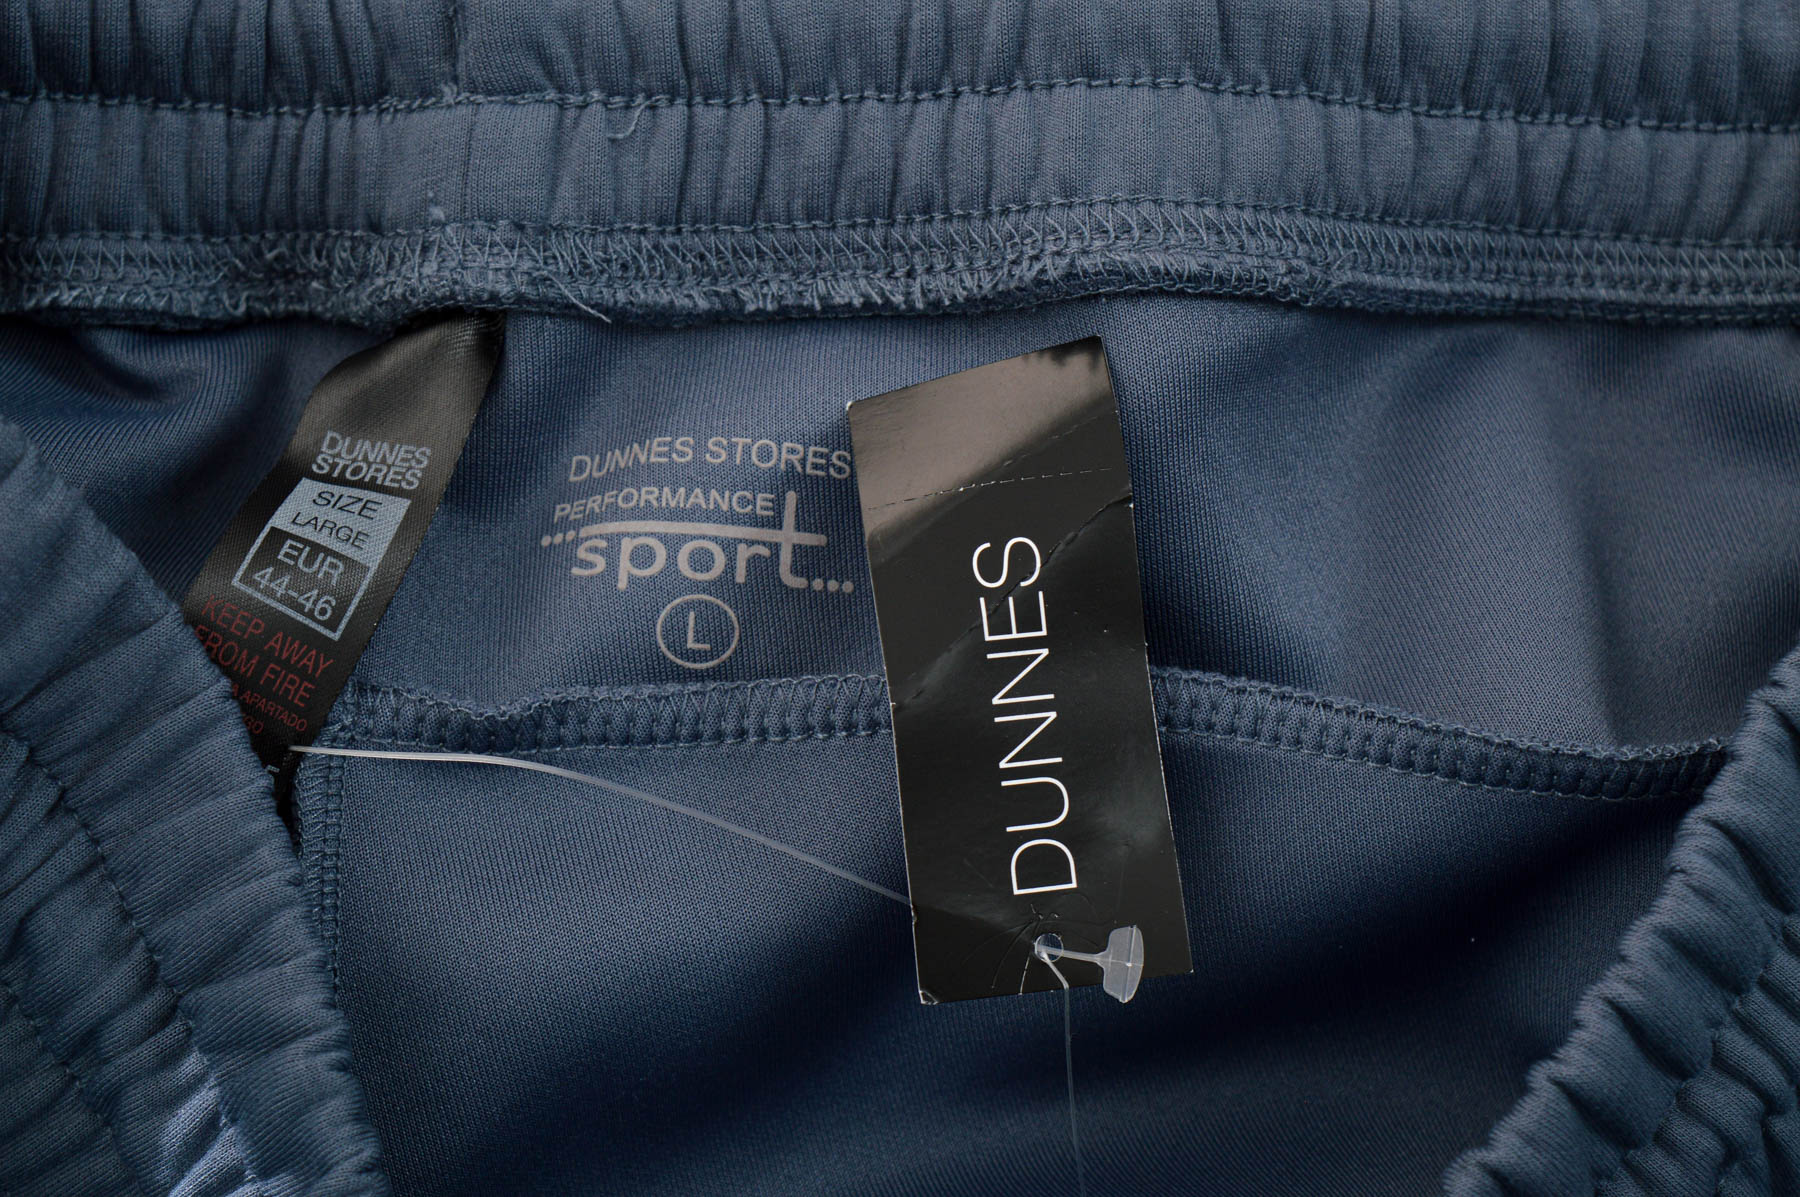 Female sports wear - Dunnes Stores - 2